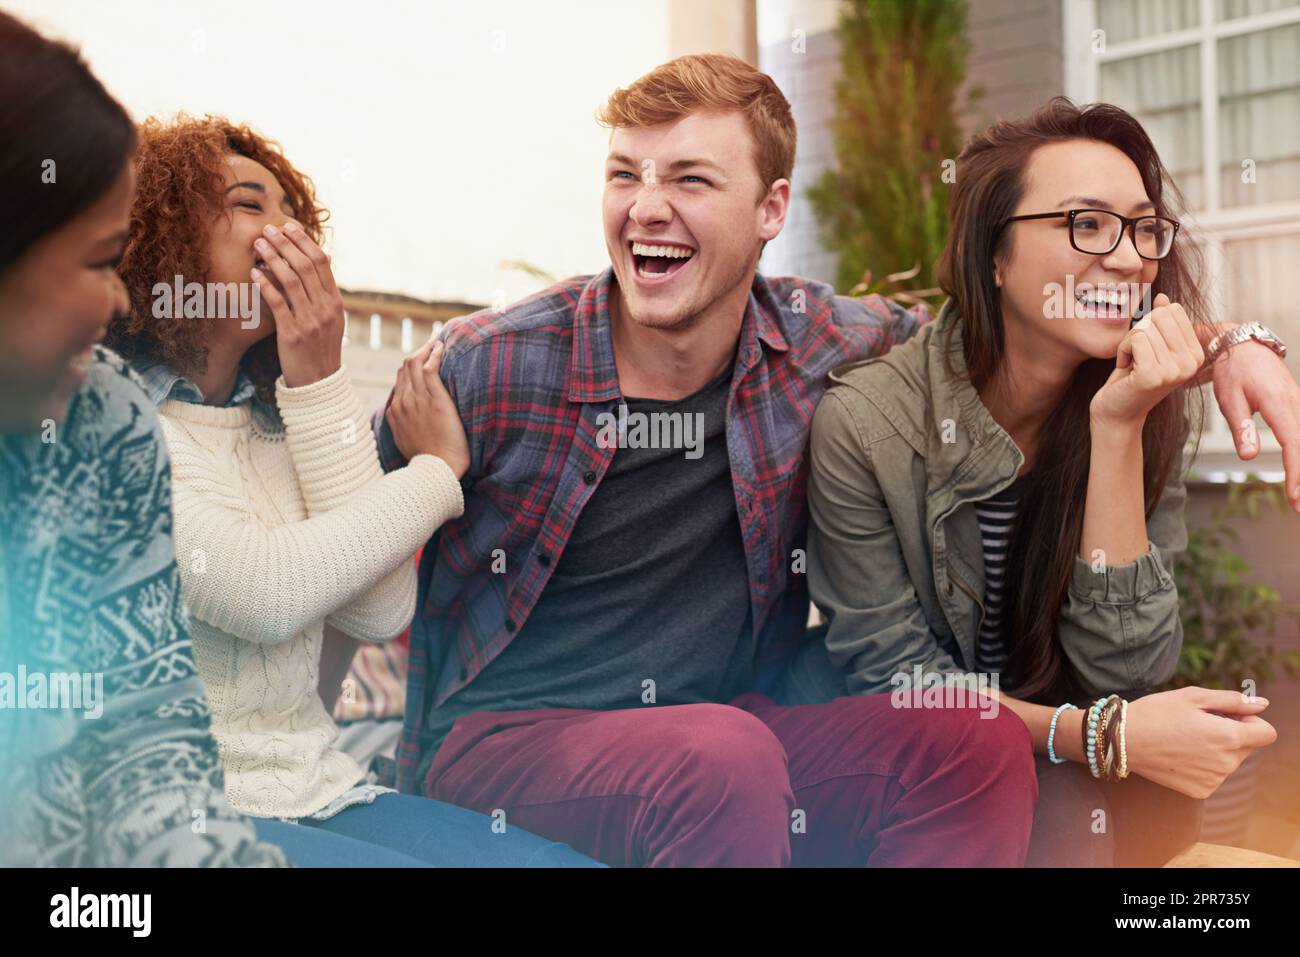 Never stop the good times. Cropped shot of a group of friends laughing and having a good time. Stock Photo